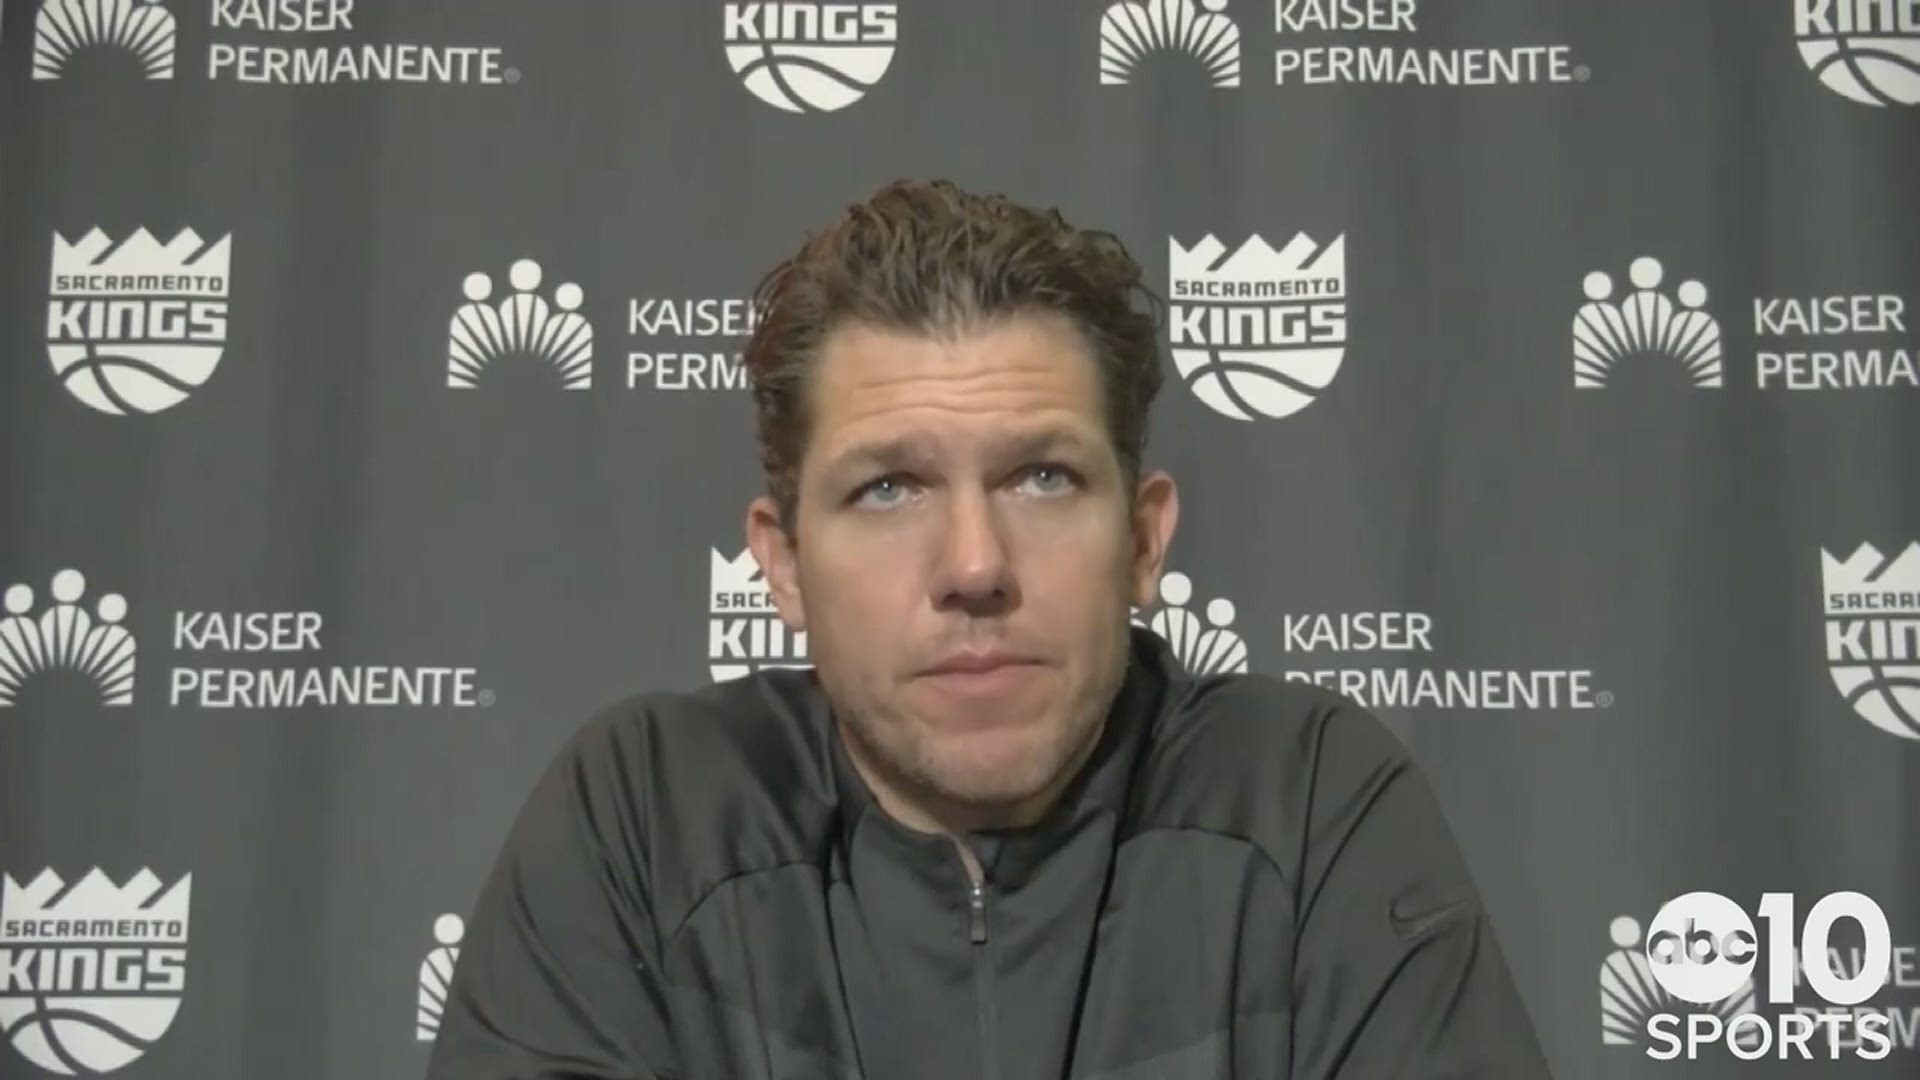 Following Friday's 115-94 loss to the Lakers in Sacramento, Kings coach Luke Walton talks about the team's shooting woes as they suffer a second consecutive defeat.